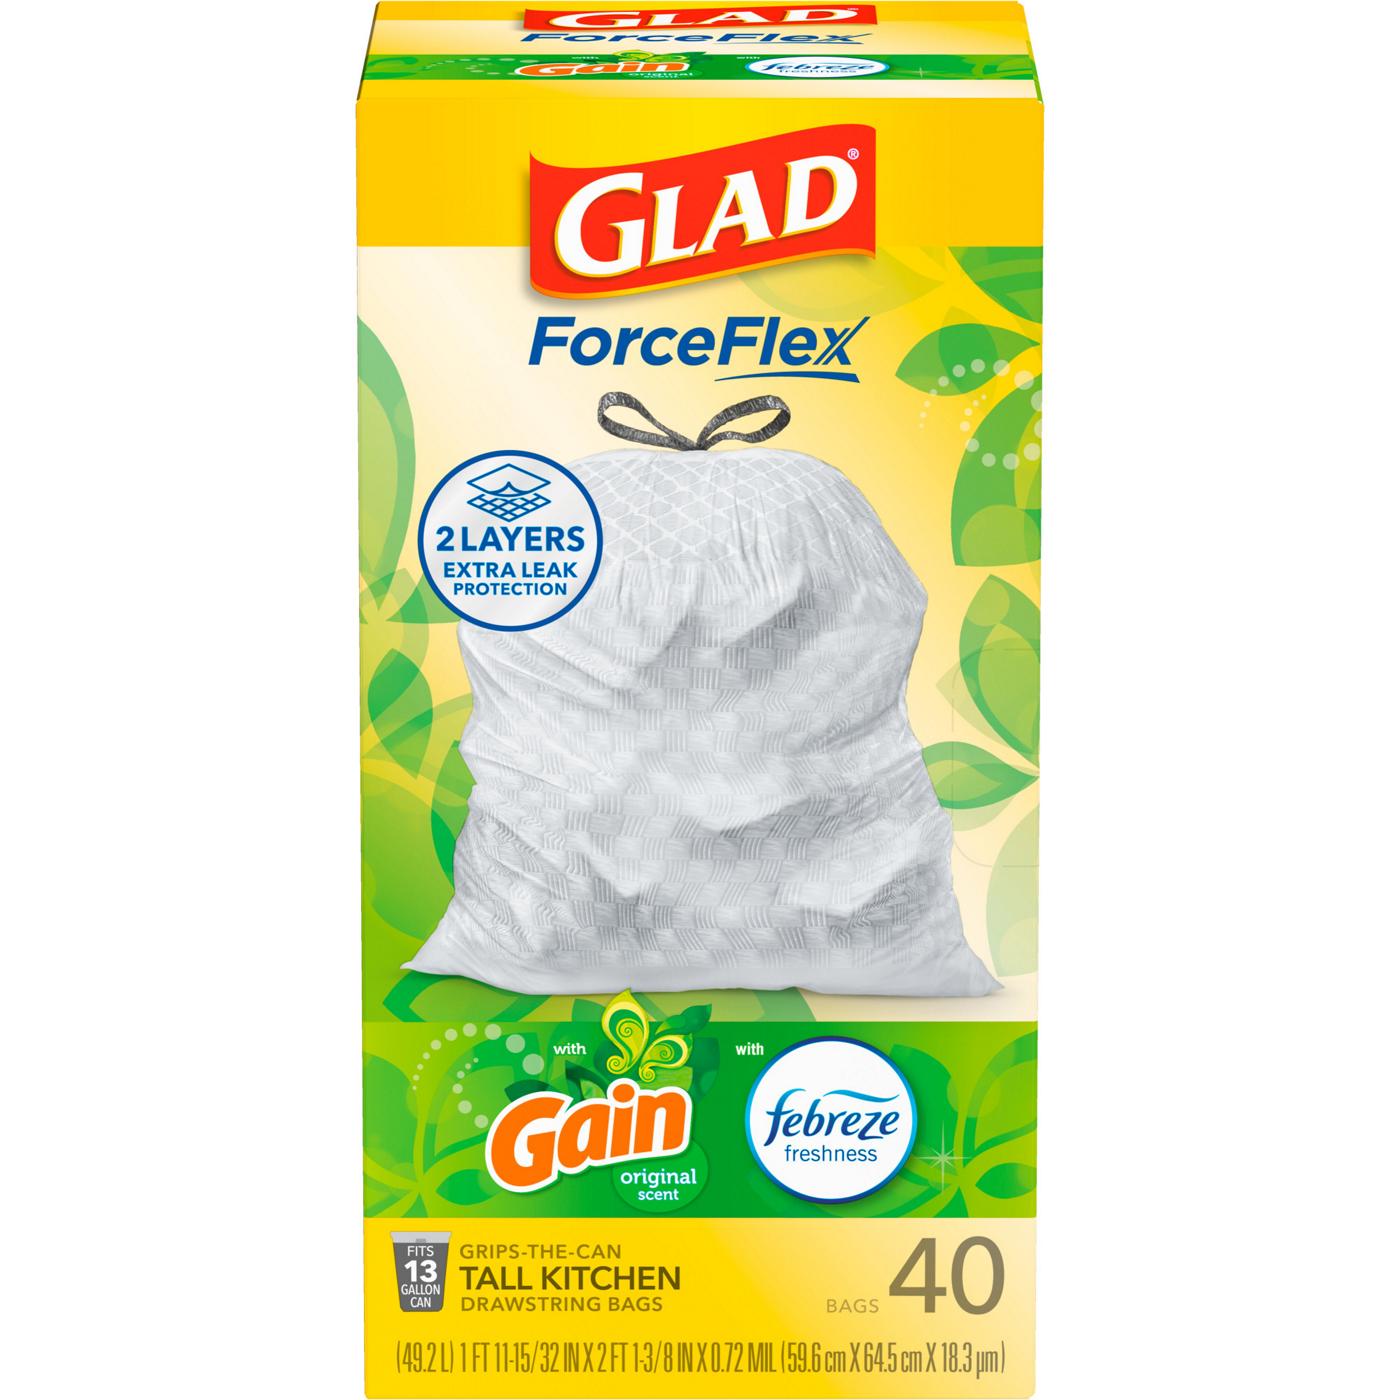 Glad ForceFlex Tall Kitchen Drawstring Trash Bags, 13 Gallon - Gain Original Scent with Febreeze Freshness; image 1 of 3